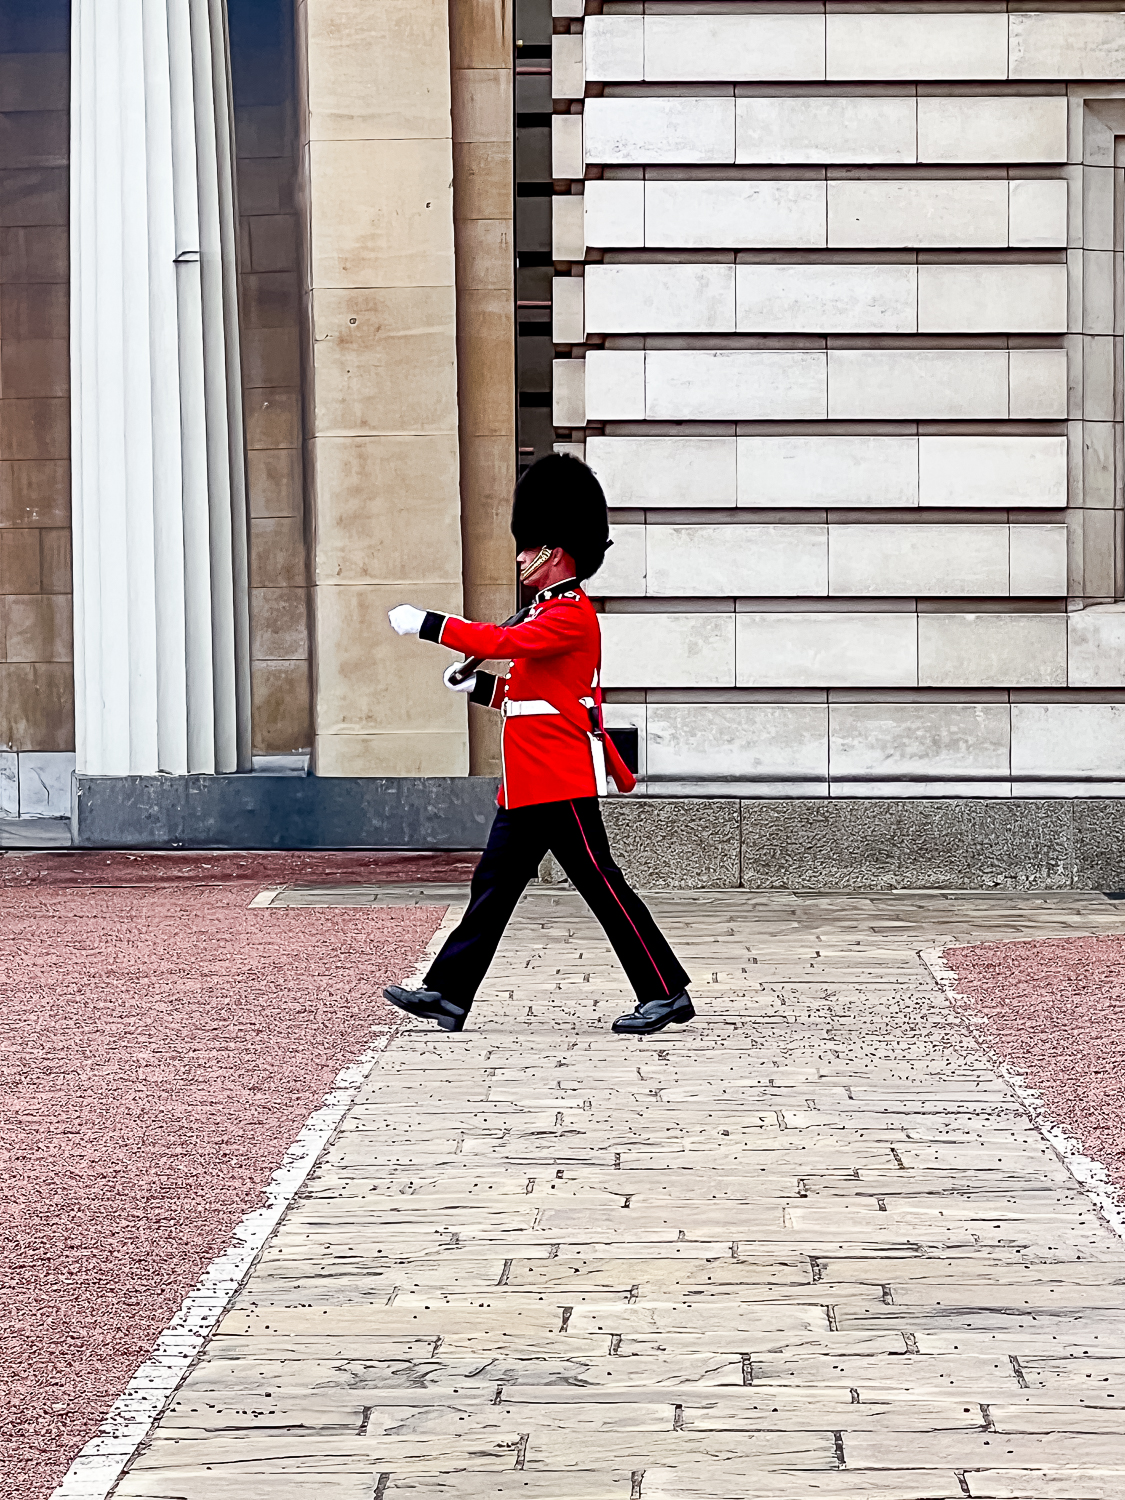 Pacific Globetrotters, budget family travel blog, shares 4 day itinerary in London with kids. Changing of the guards